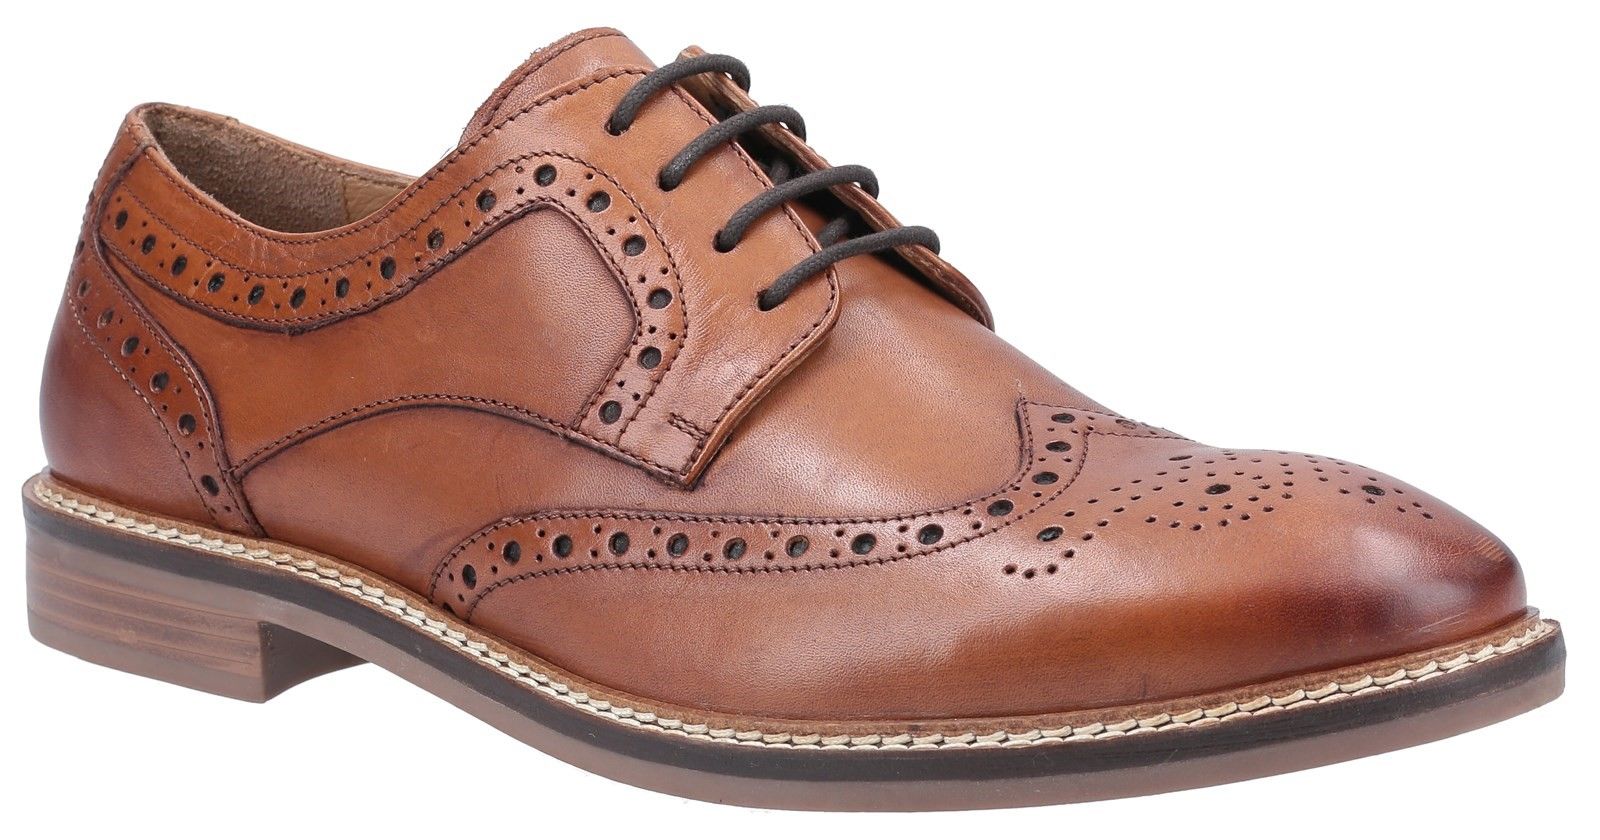 Men's wing-tip brogue shoe; Bryson is crafted with leather and has a comfortable cushioned memory foam leather footbed. The hardwearing TPR flexible sole unit makes this the perfect smart all day footwear.Leather upper with brogue detail. 
Leather lining. 
Cushion comfort memory foam leather sock. 
Flexible TPR sole with stacked effect heel and stitched leather rand detail.